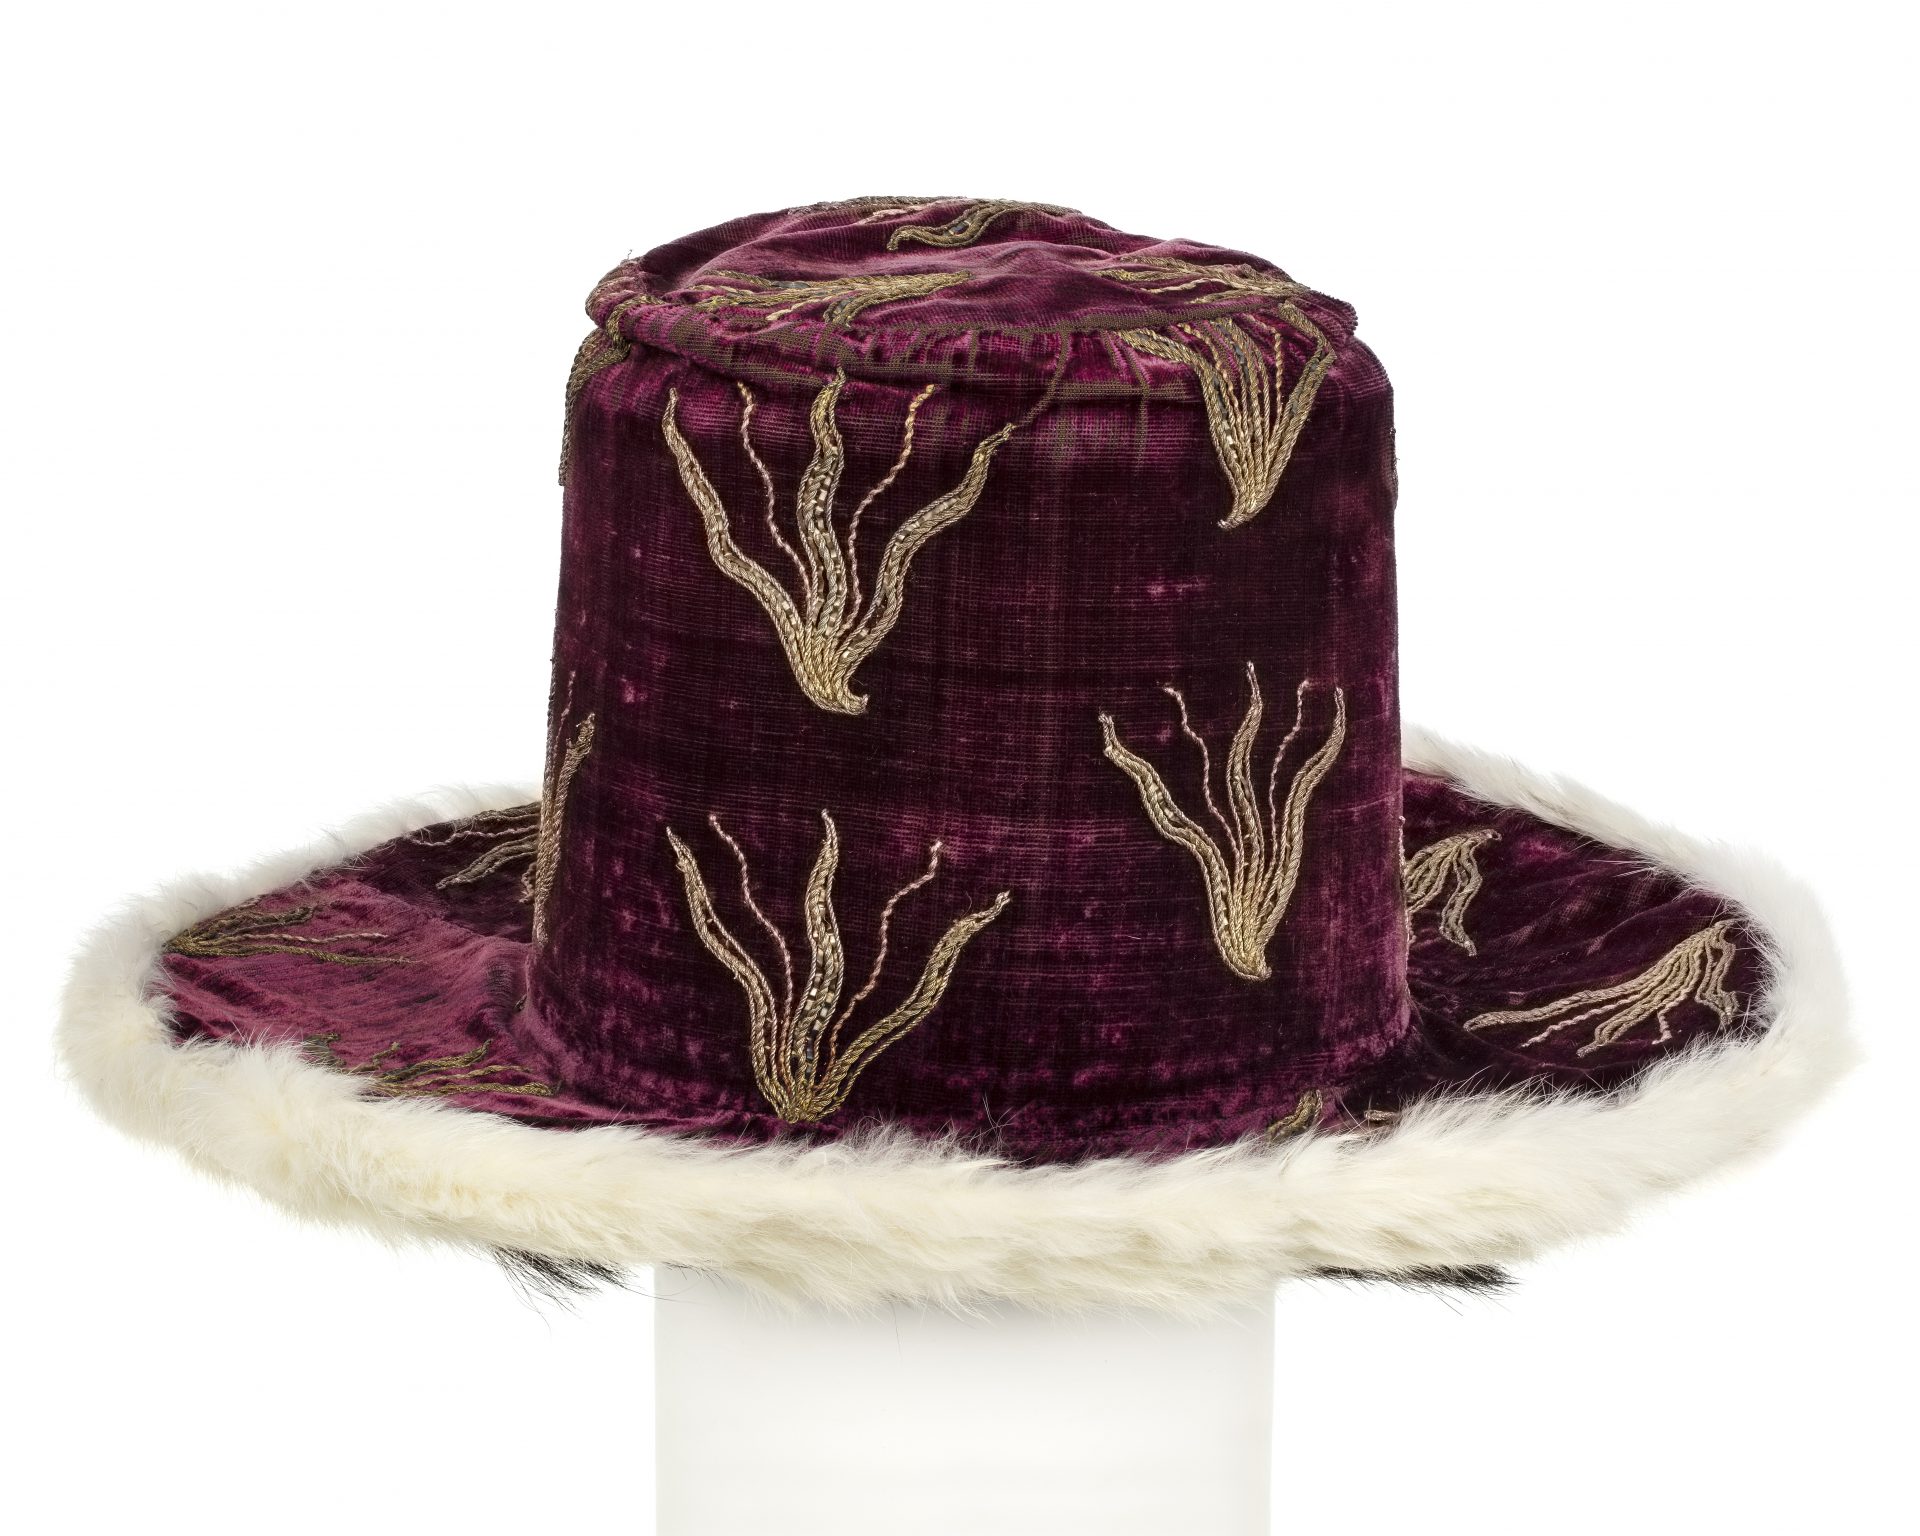 A purple hat of velvet with embroidered flames in gold.